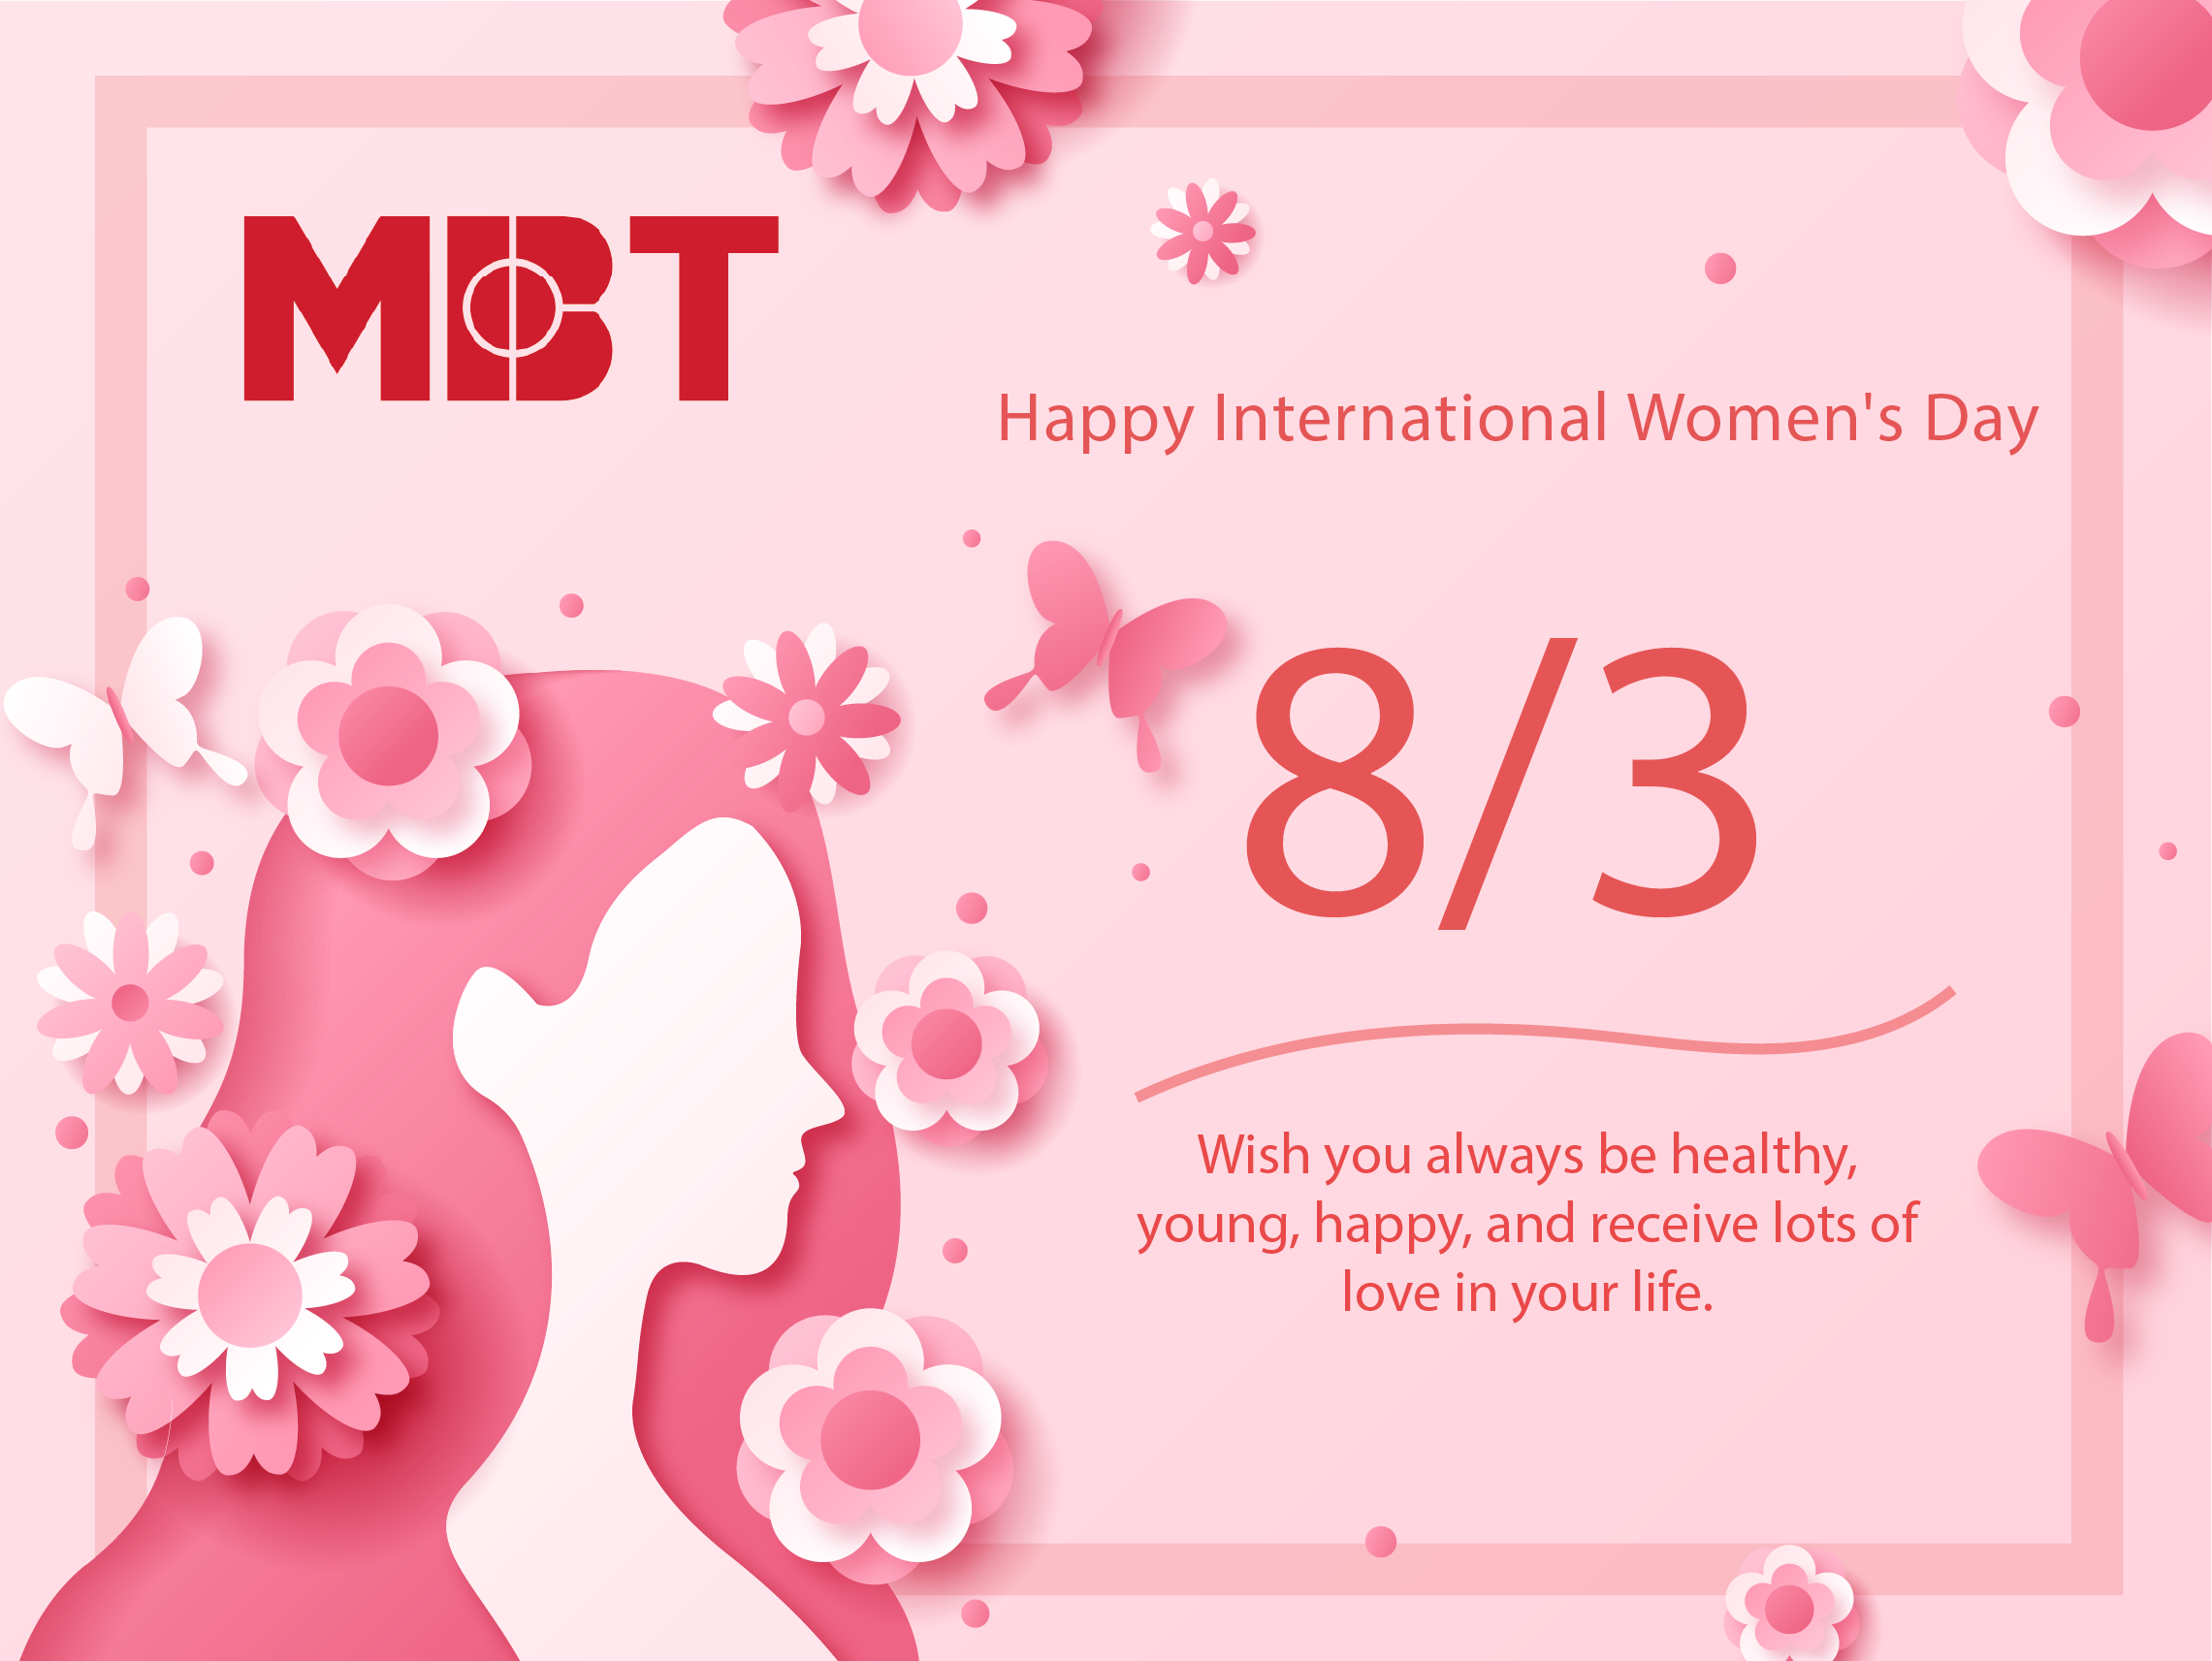 Letter of congratulation on International Women's Day 8-3 of MBT leaders